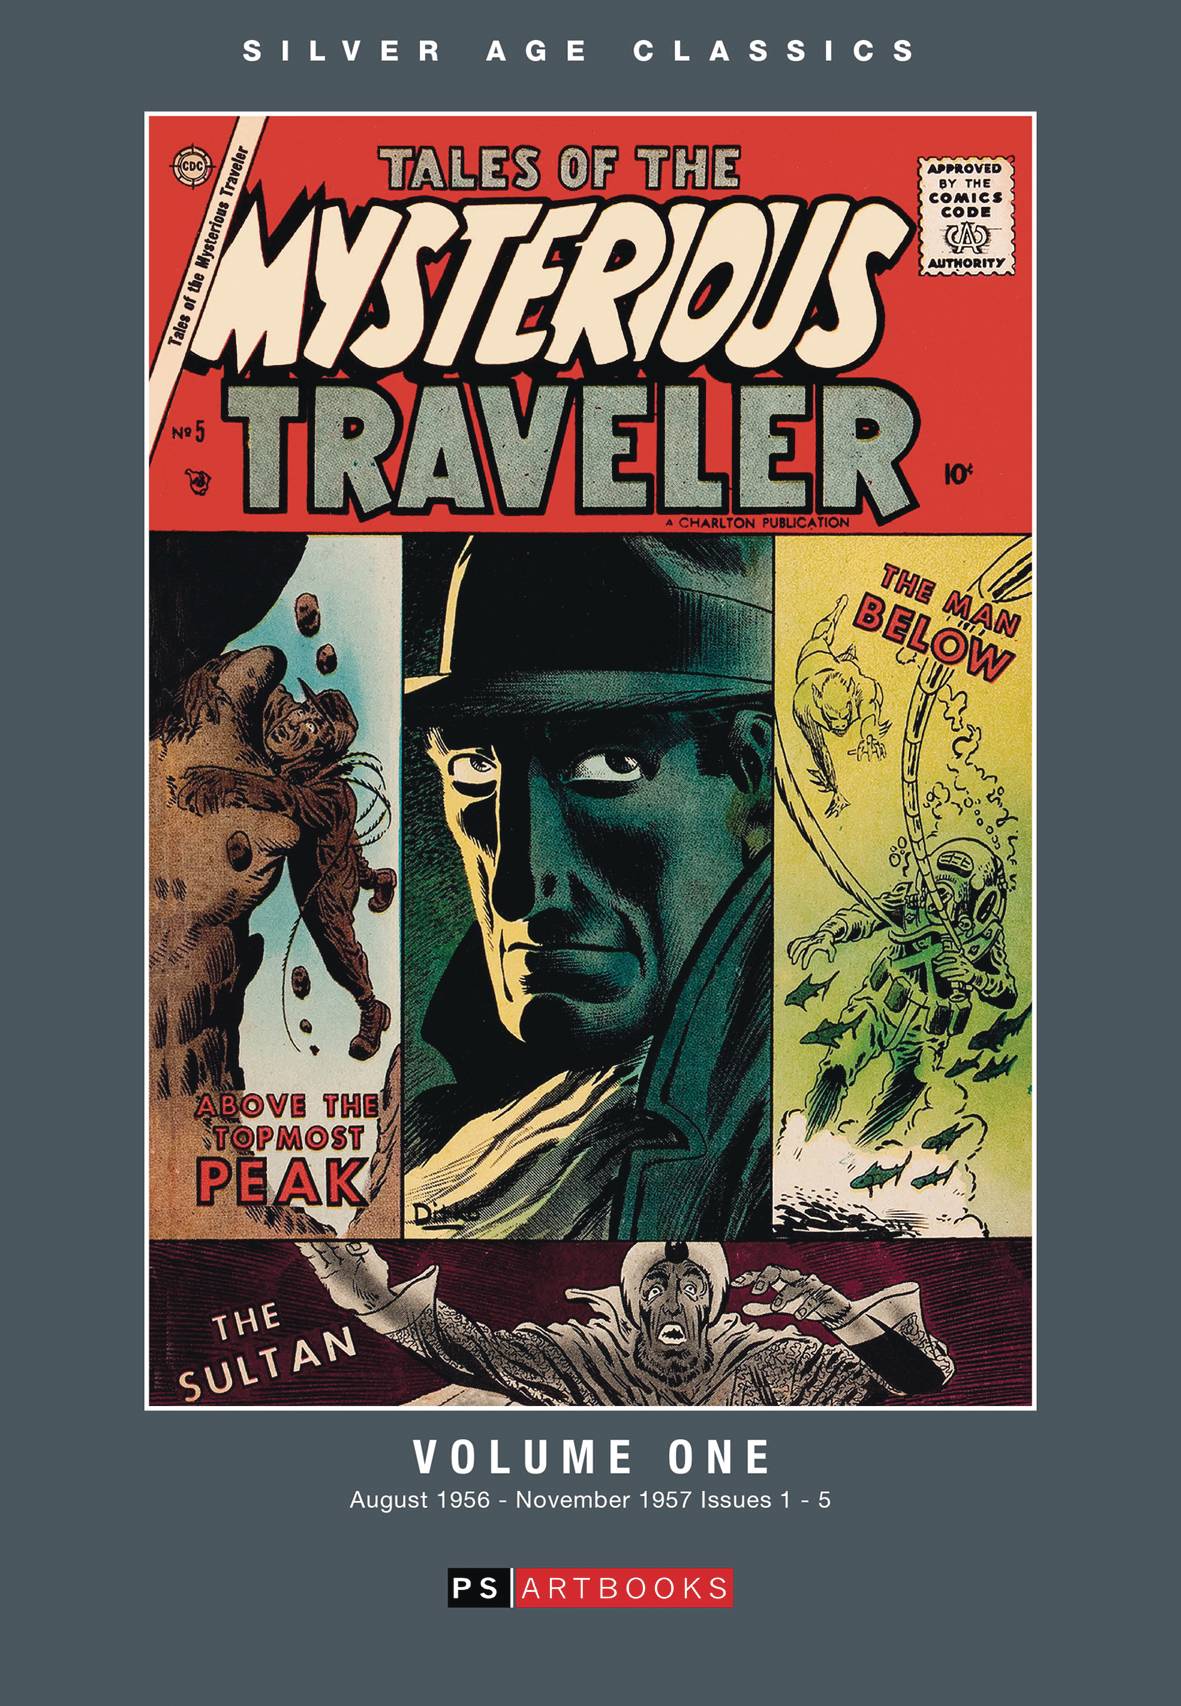 Silver Age Classics Tales of Mysterious Traveler Hardcover Volume 1